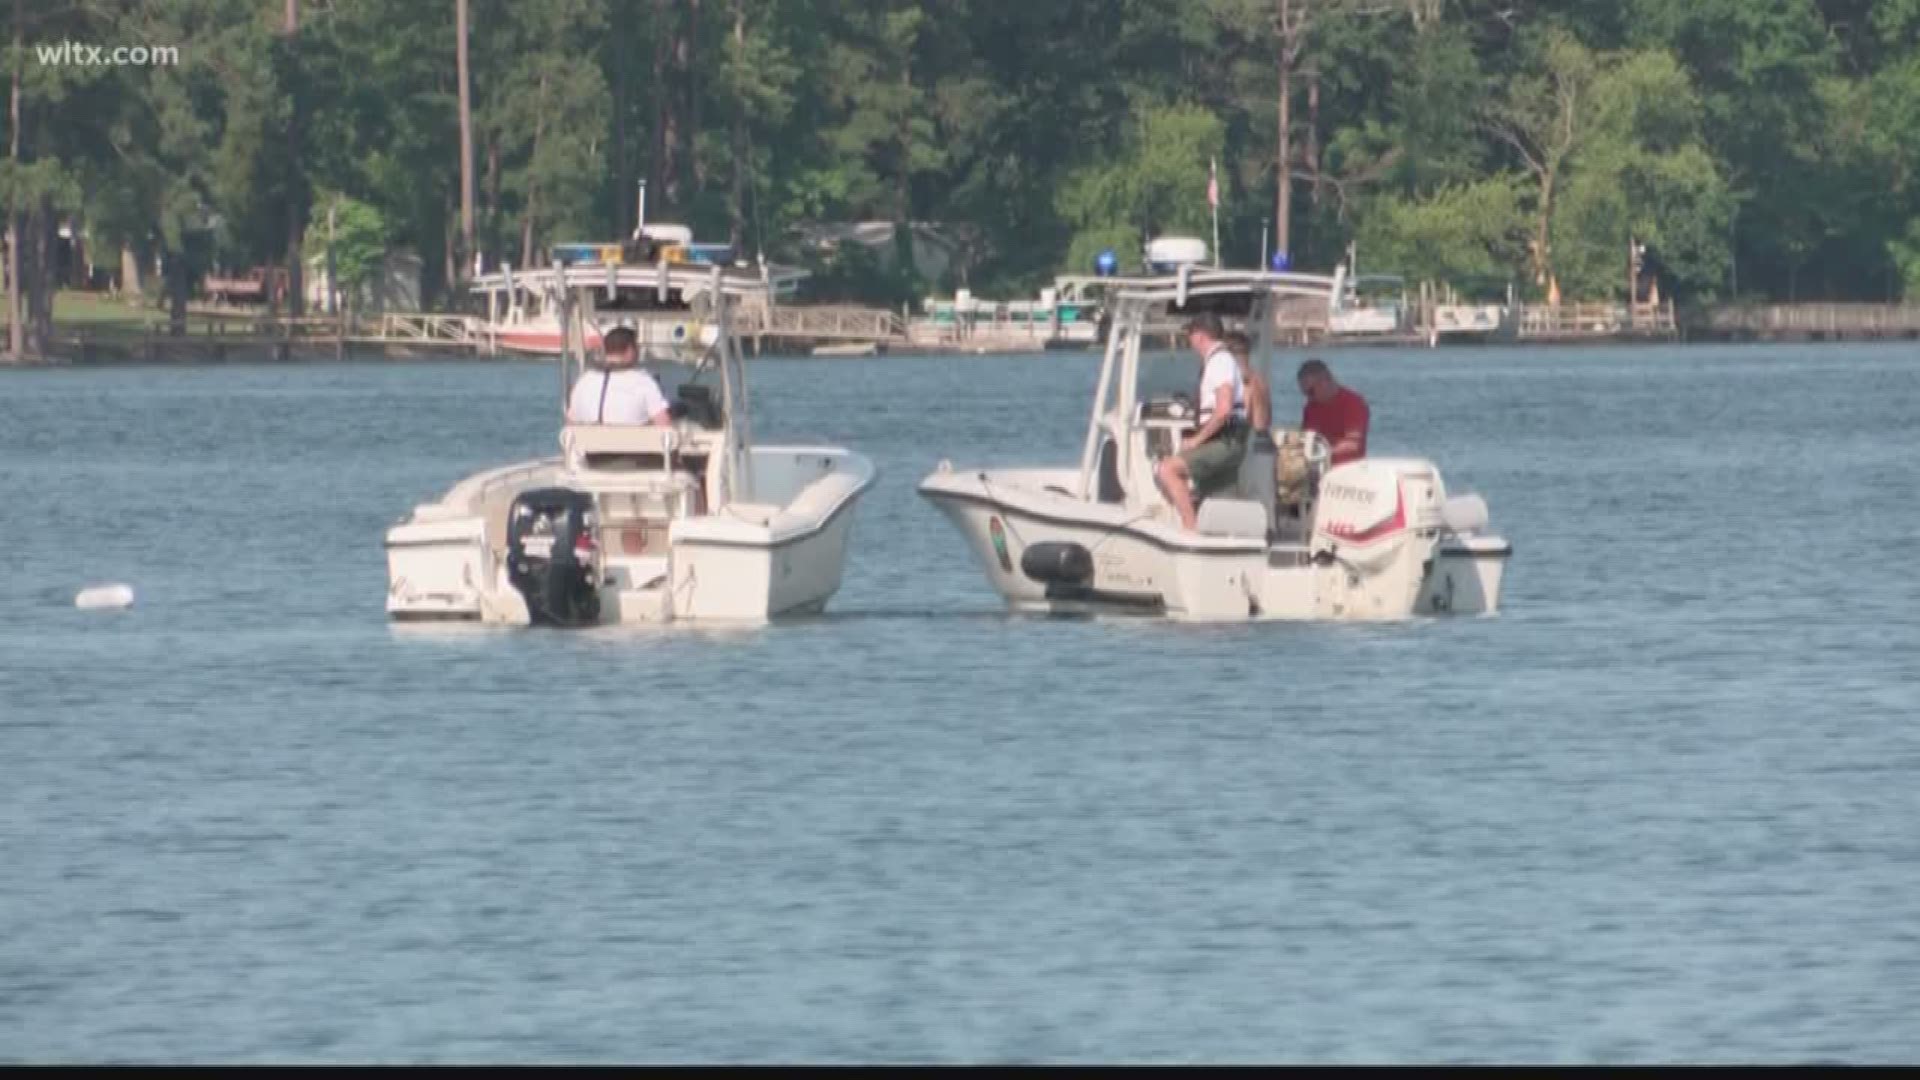 The Richland county coroner has identified the person who drowned in Lake Murray on Sunday.   Rasheed Taylor, 47, was found in 45 feet of water 